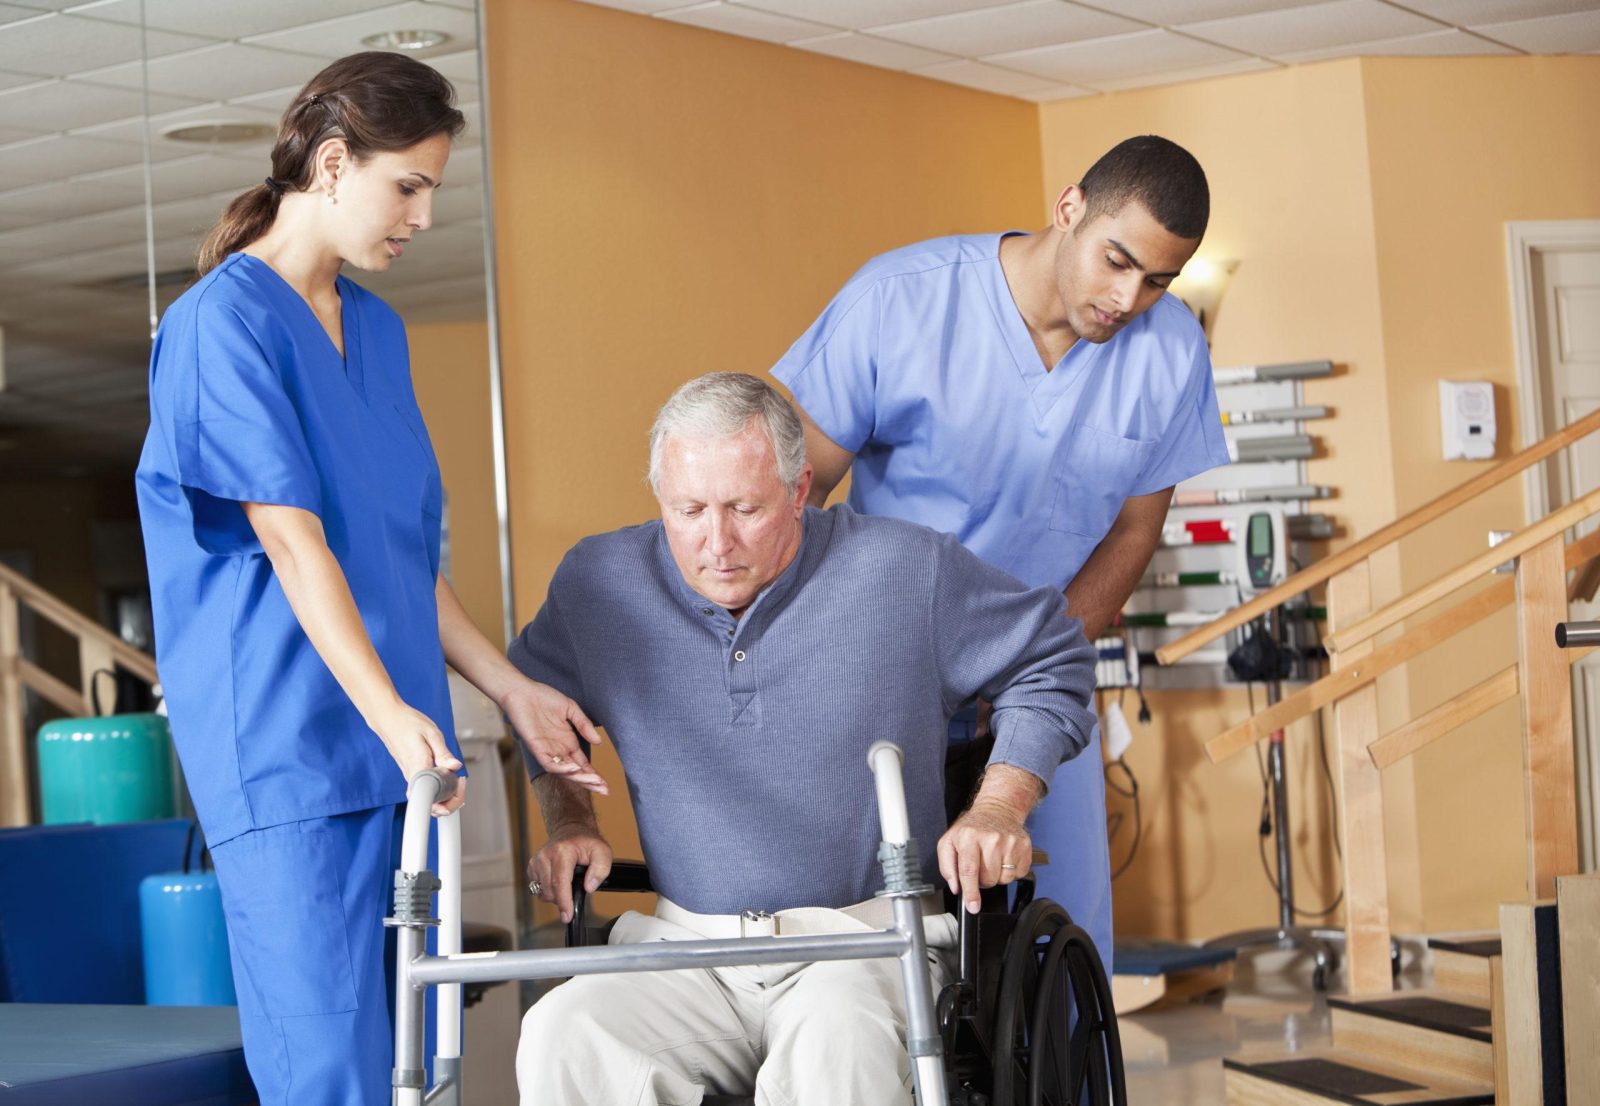 Healthcare professionals are helping senior men (60s) stand up from a wheelchair to use walkers